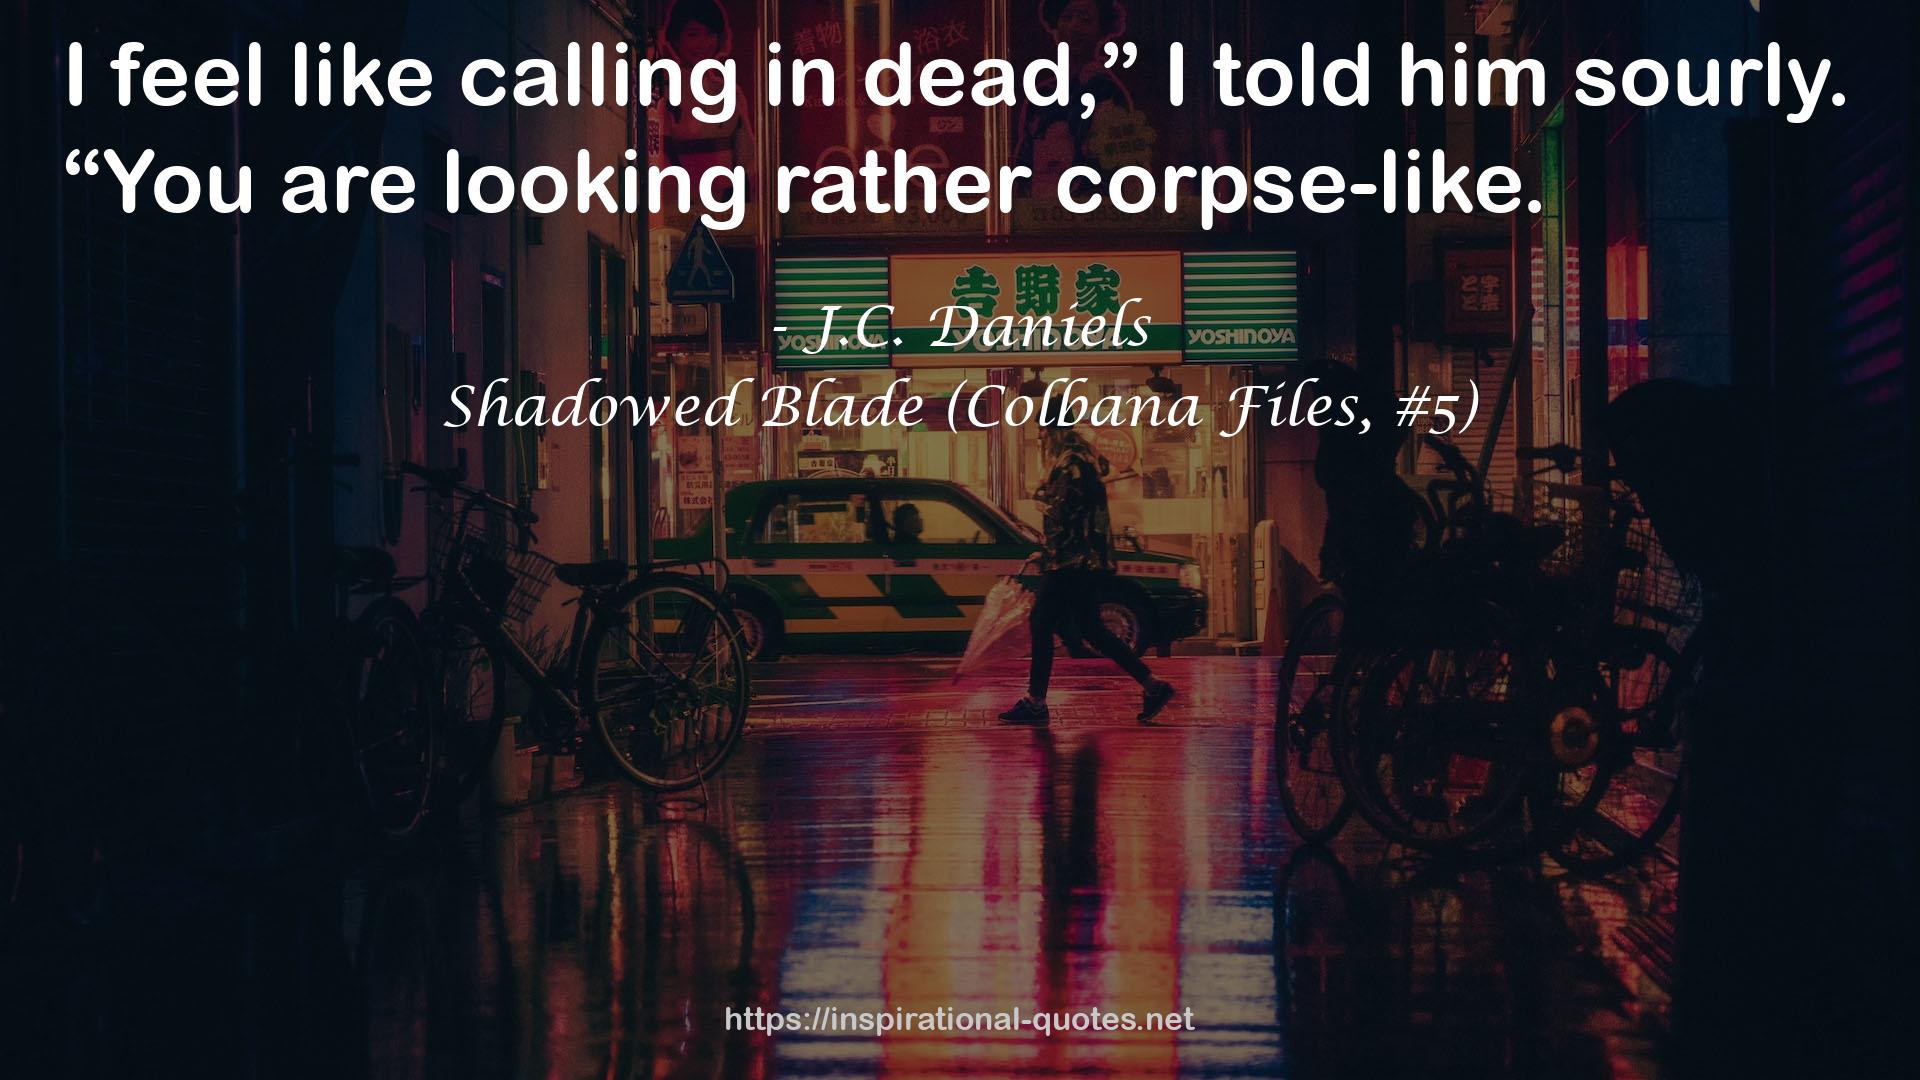 Shadowed Blade (Colbana Files, #5) QUOTES